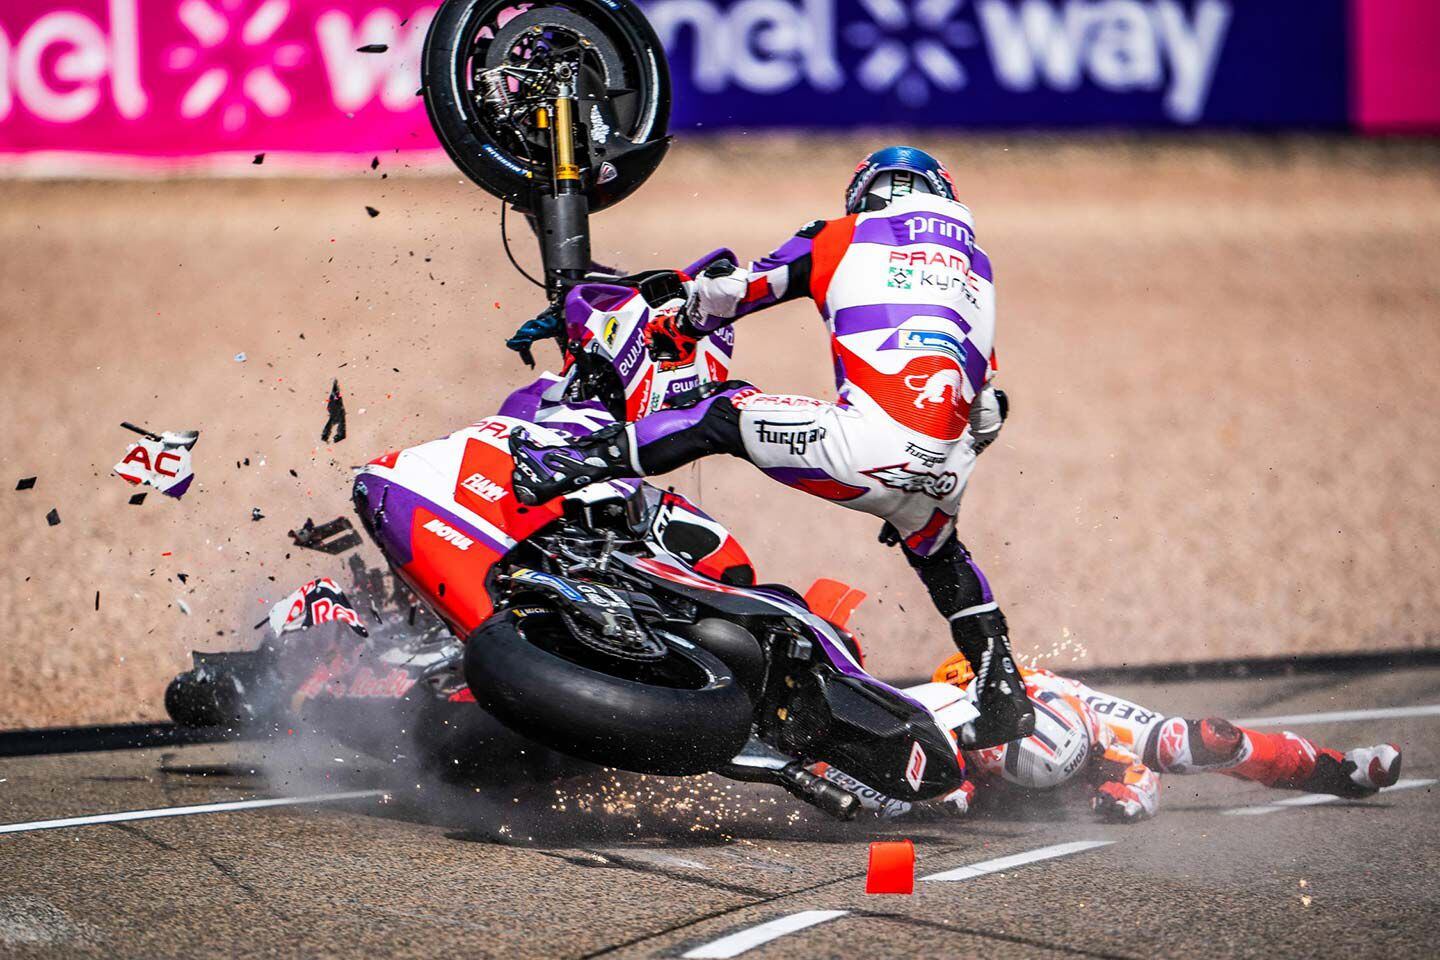 Marc Márquez’s crash-filled weekend included a rather terrifying incident with Johann Zarco.